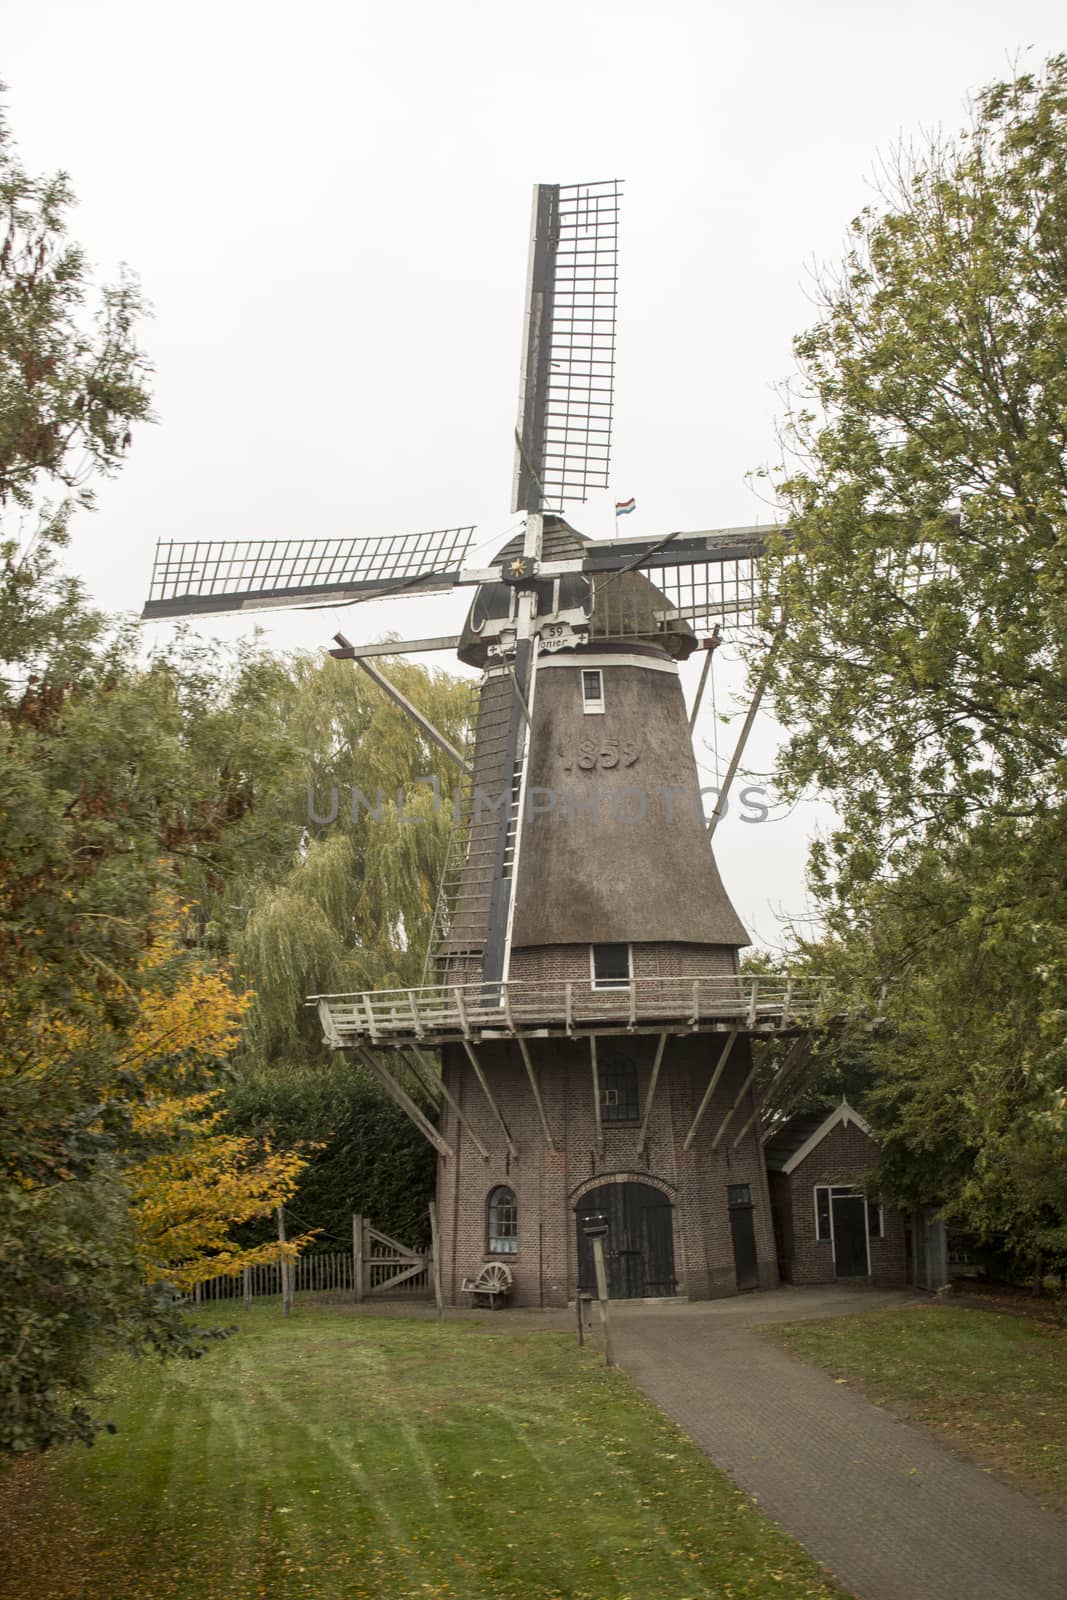 A small windmill hidden between trees with a small cobblestone path leading to it